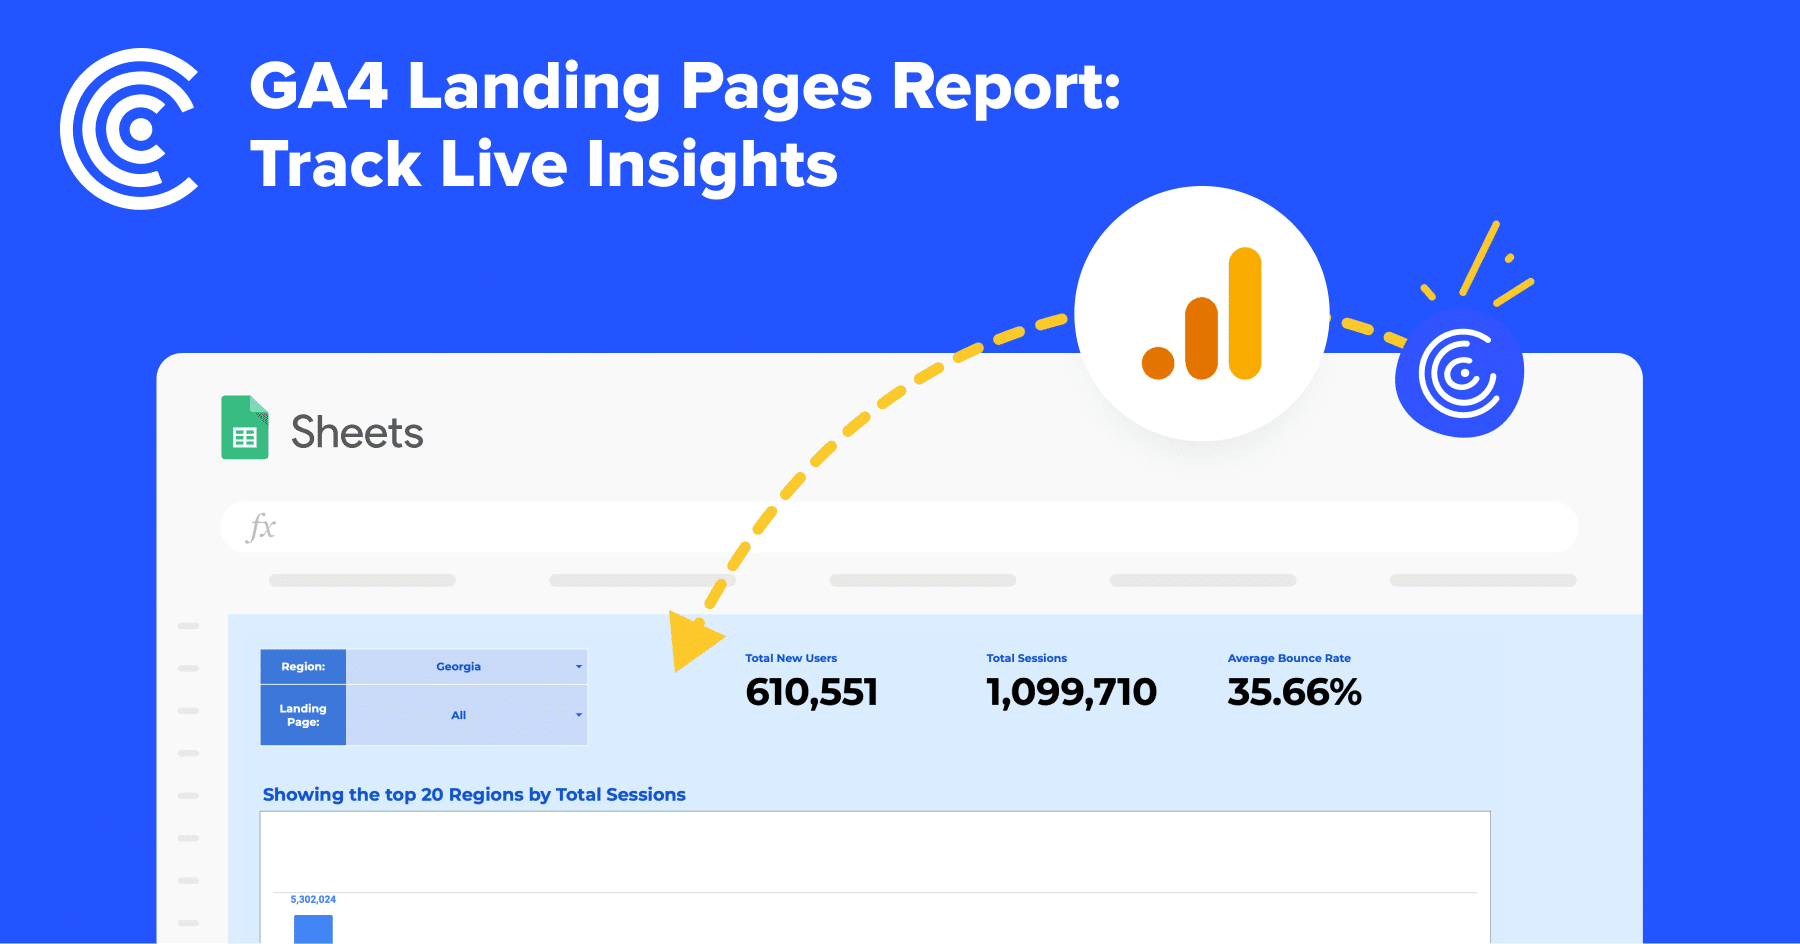 GA4 Landing Pages Report Live Data